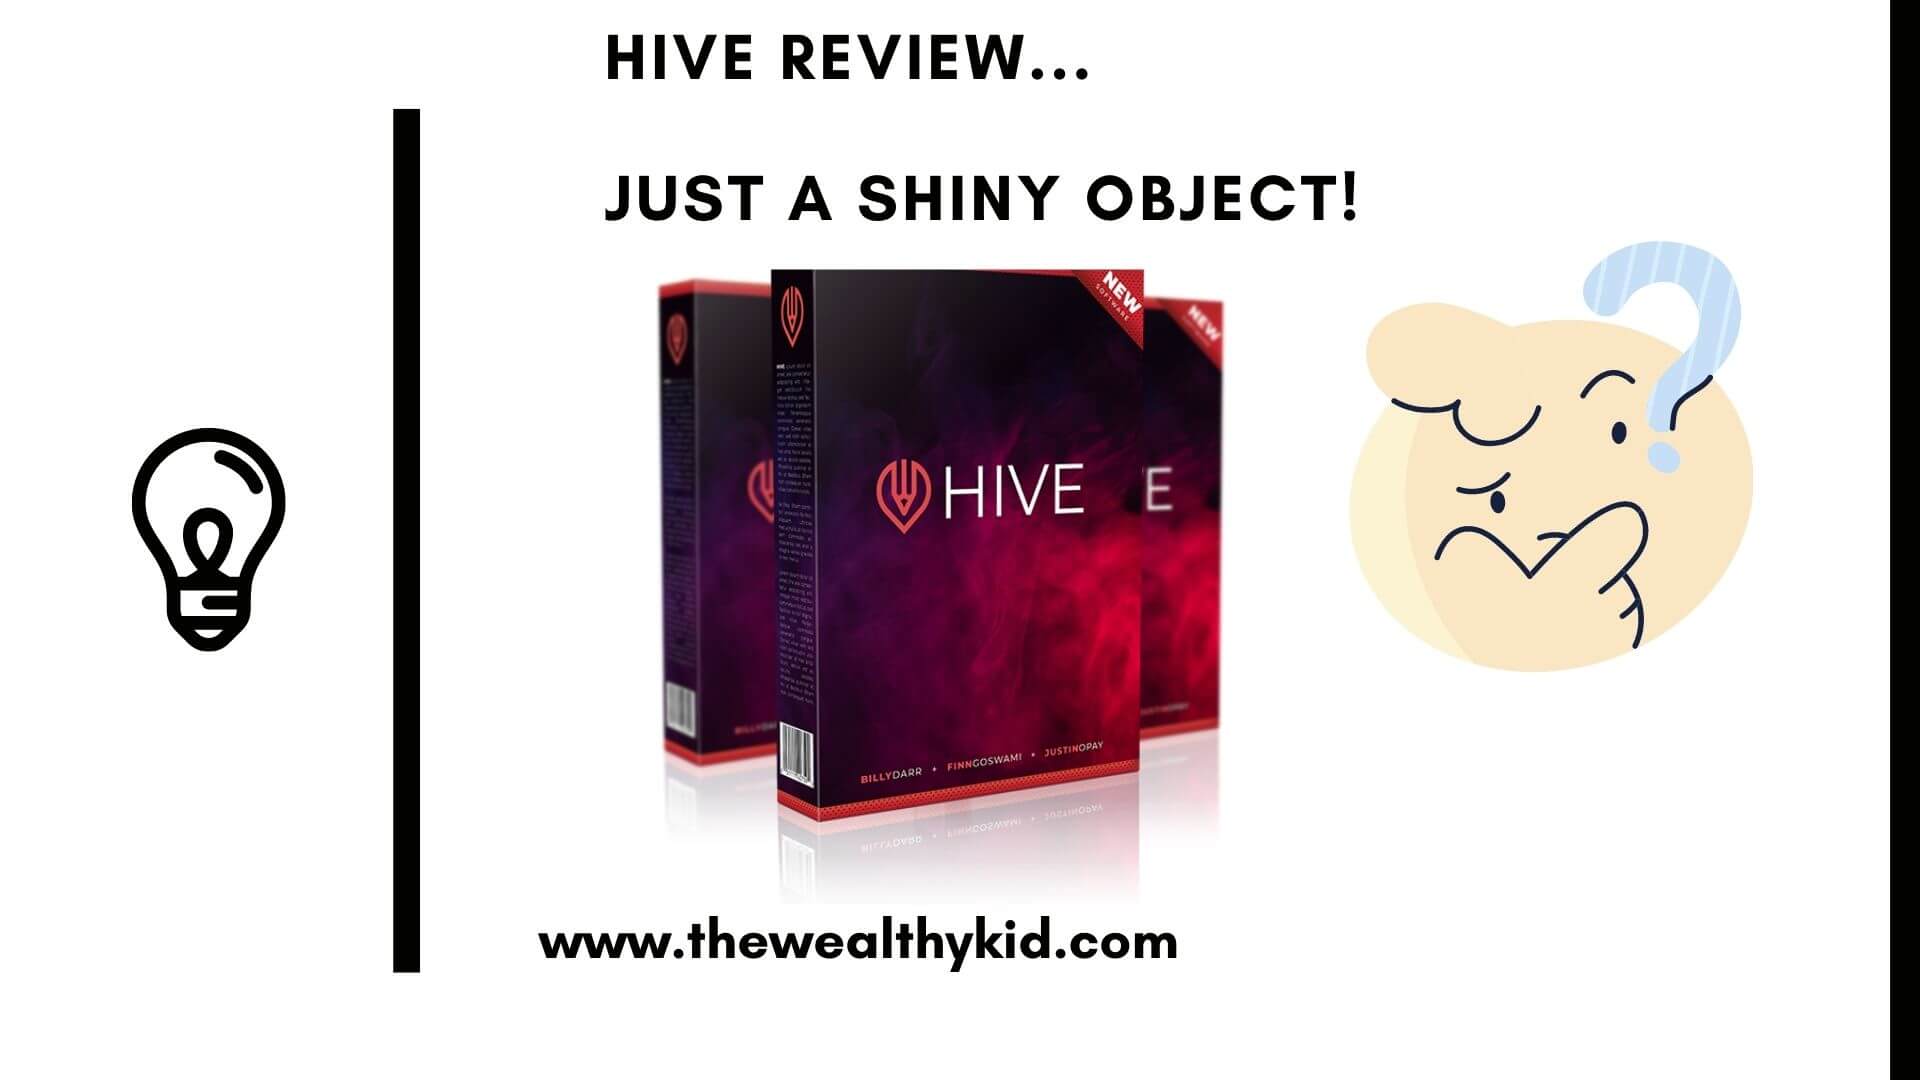 What Is Hive Software? – A Typical Shiny Object!